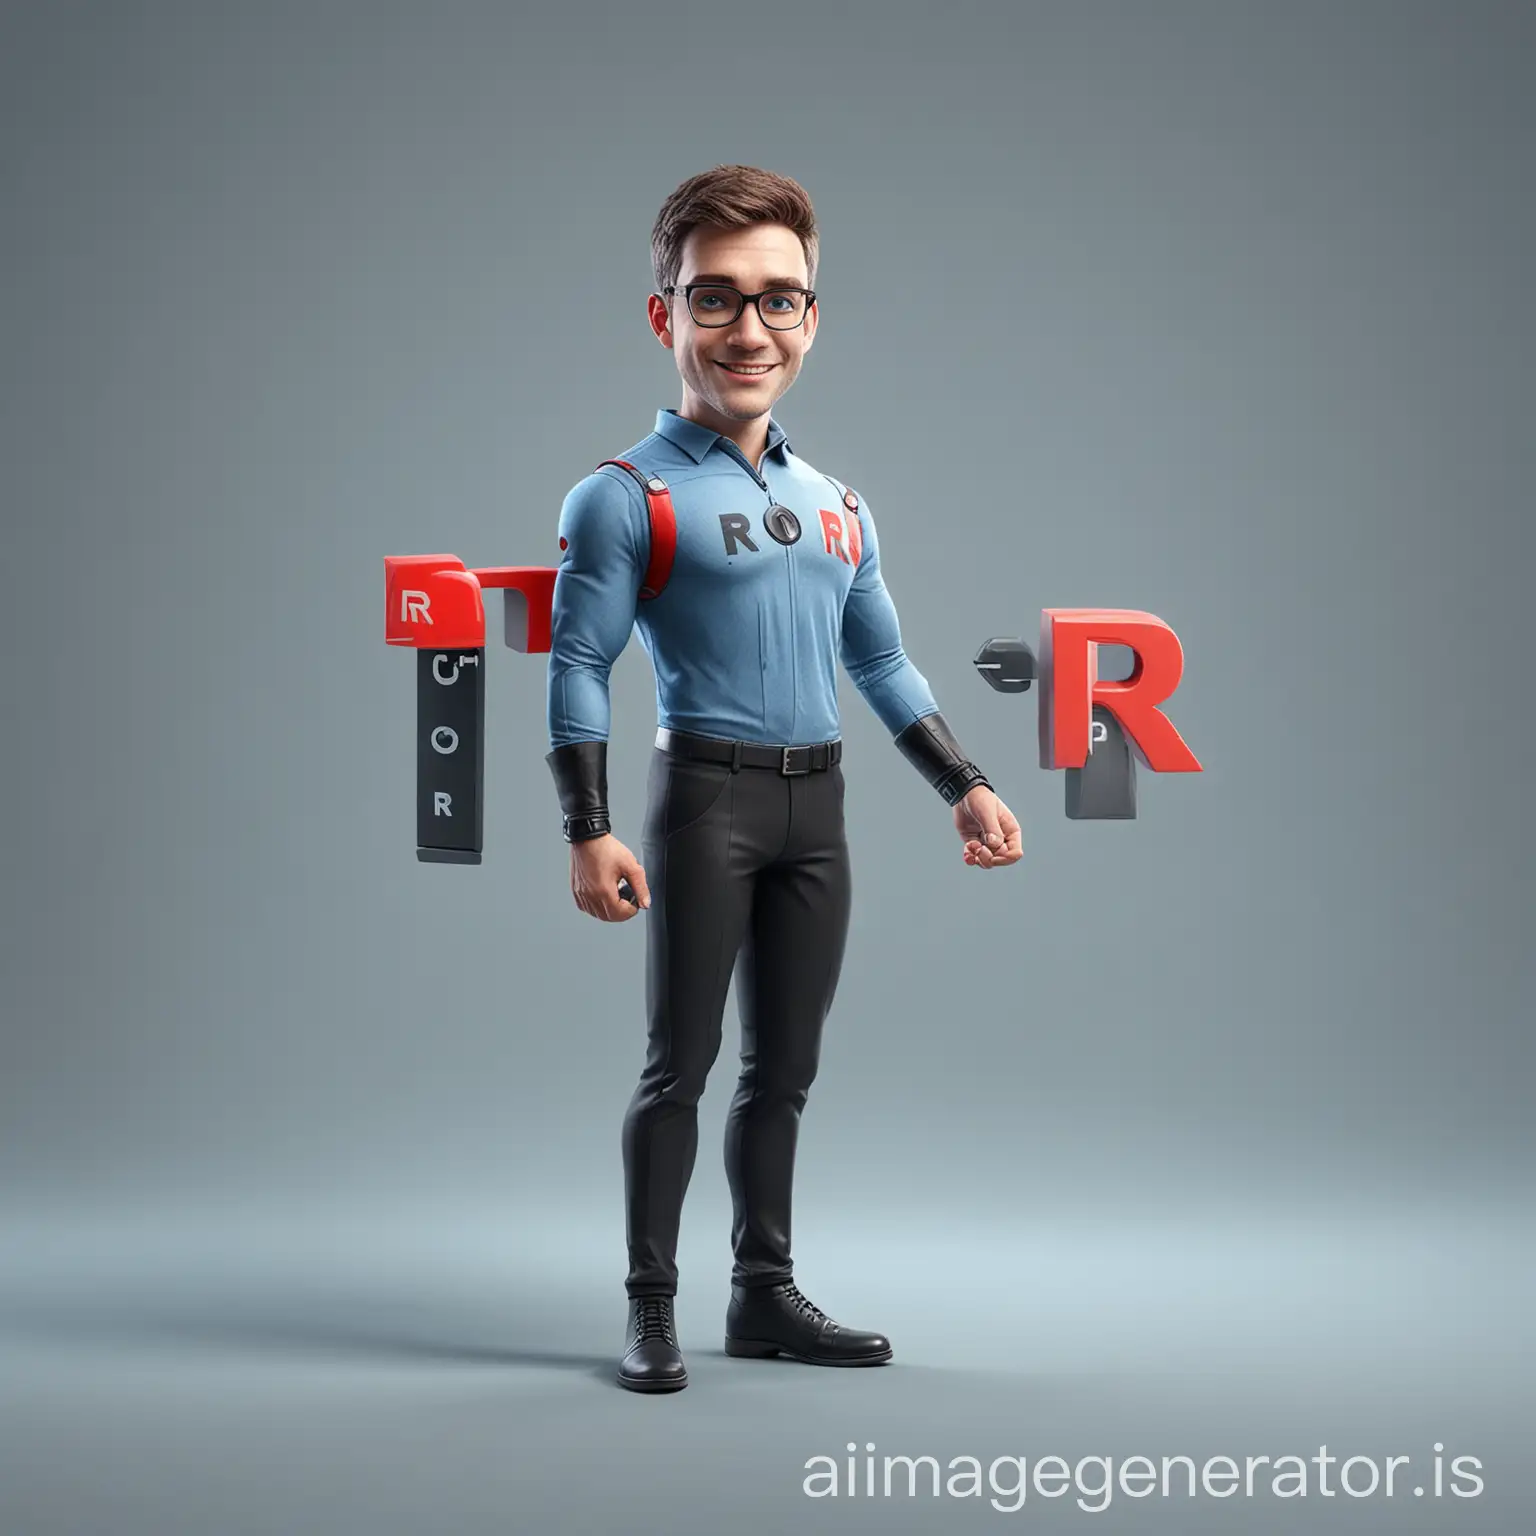 Characteristic fictional character, with technological and human characteristics, main figure of a digital marketing agency, with friendly, happy, friendly, innovative and technological appearance, in color scheme of gray, blue, red and black and wearing the letter R